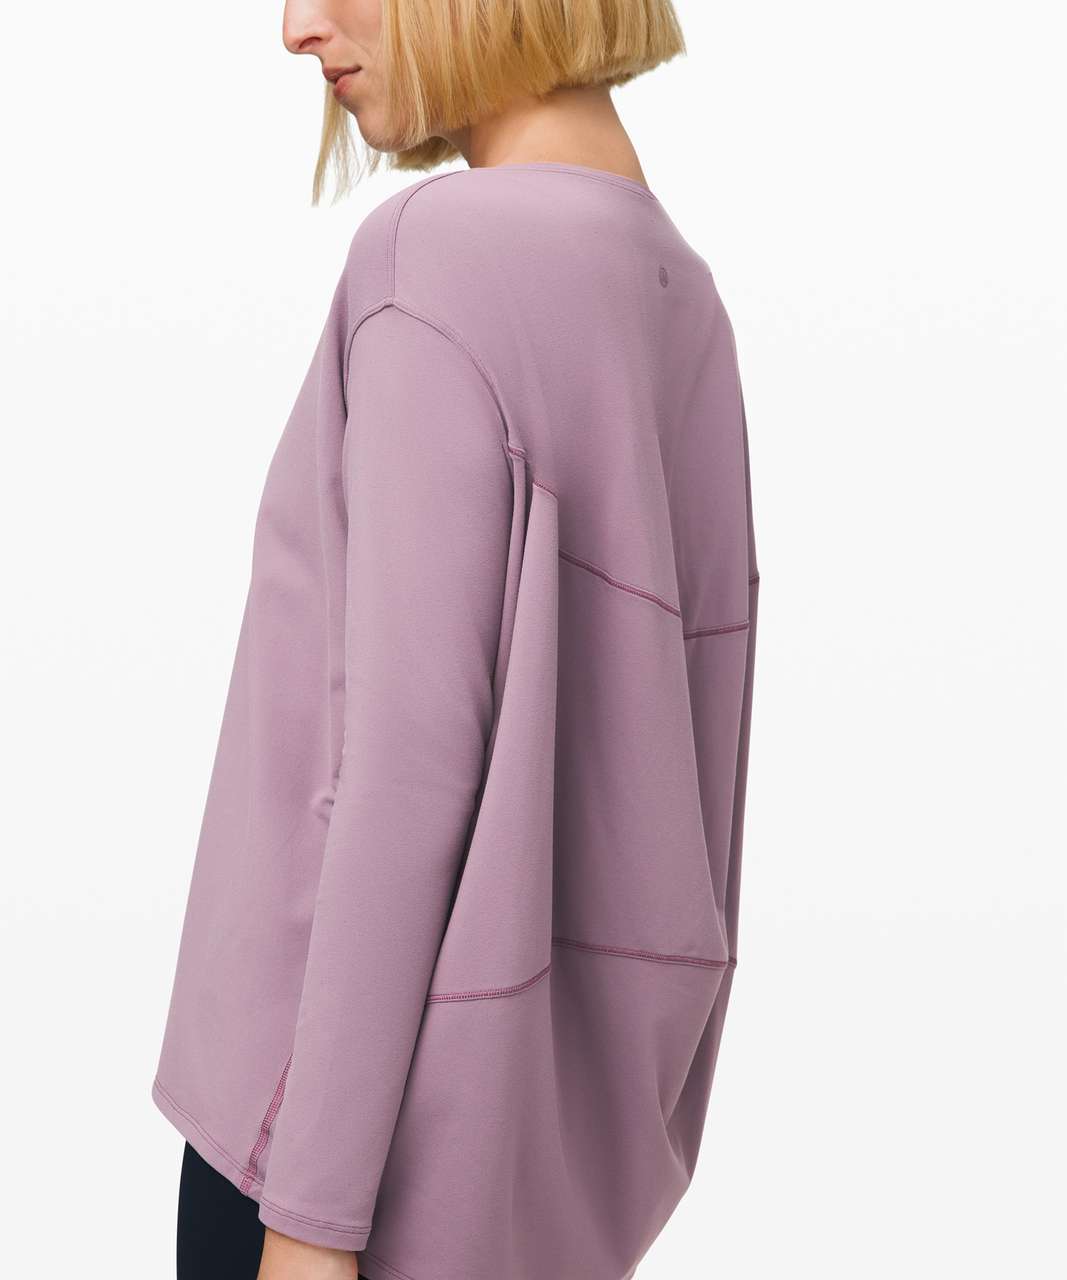 Lululemon Back in Action Long Sleeve *Rulu - Frosted Mulberry